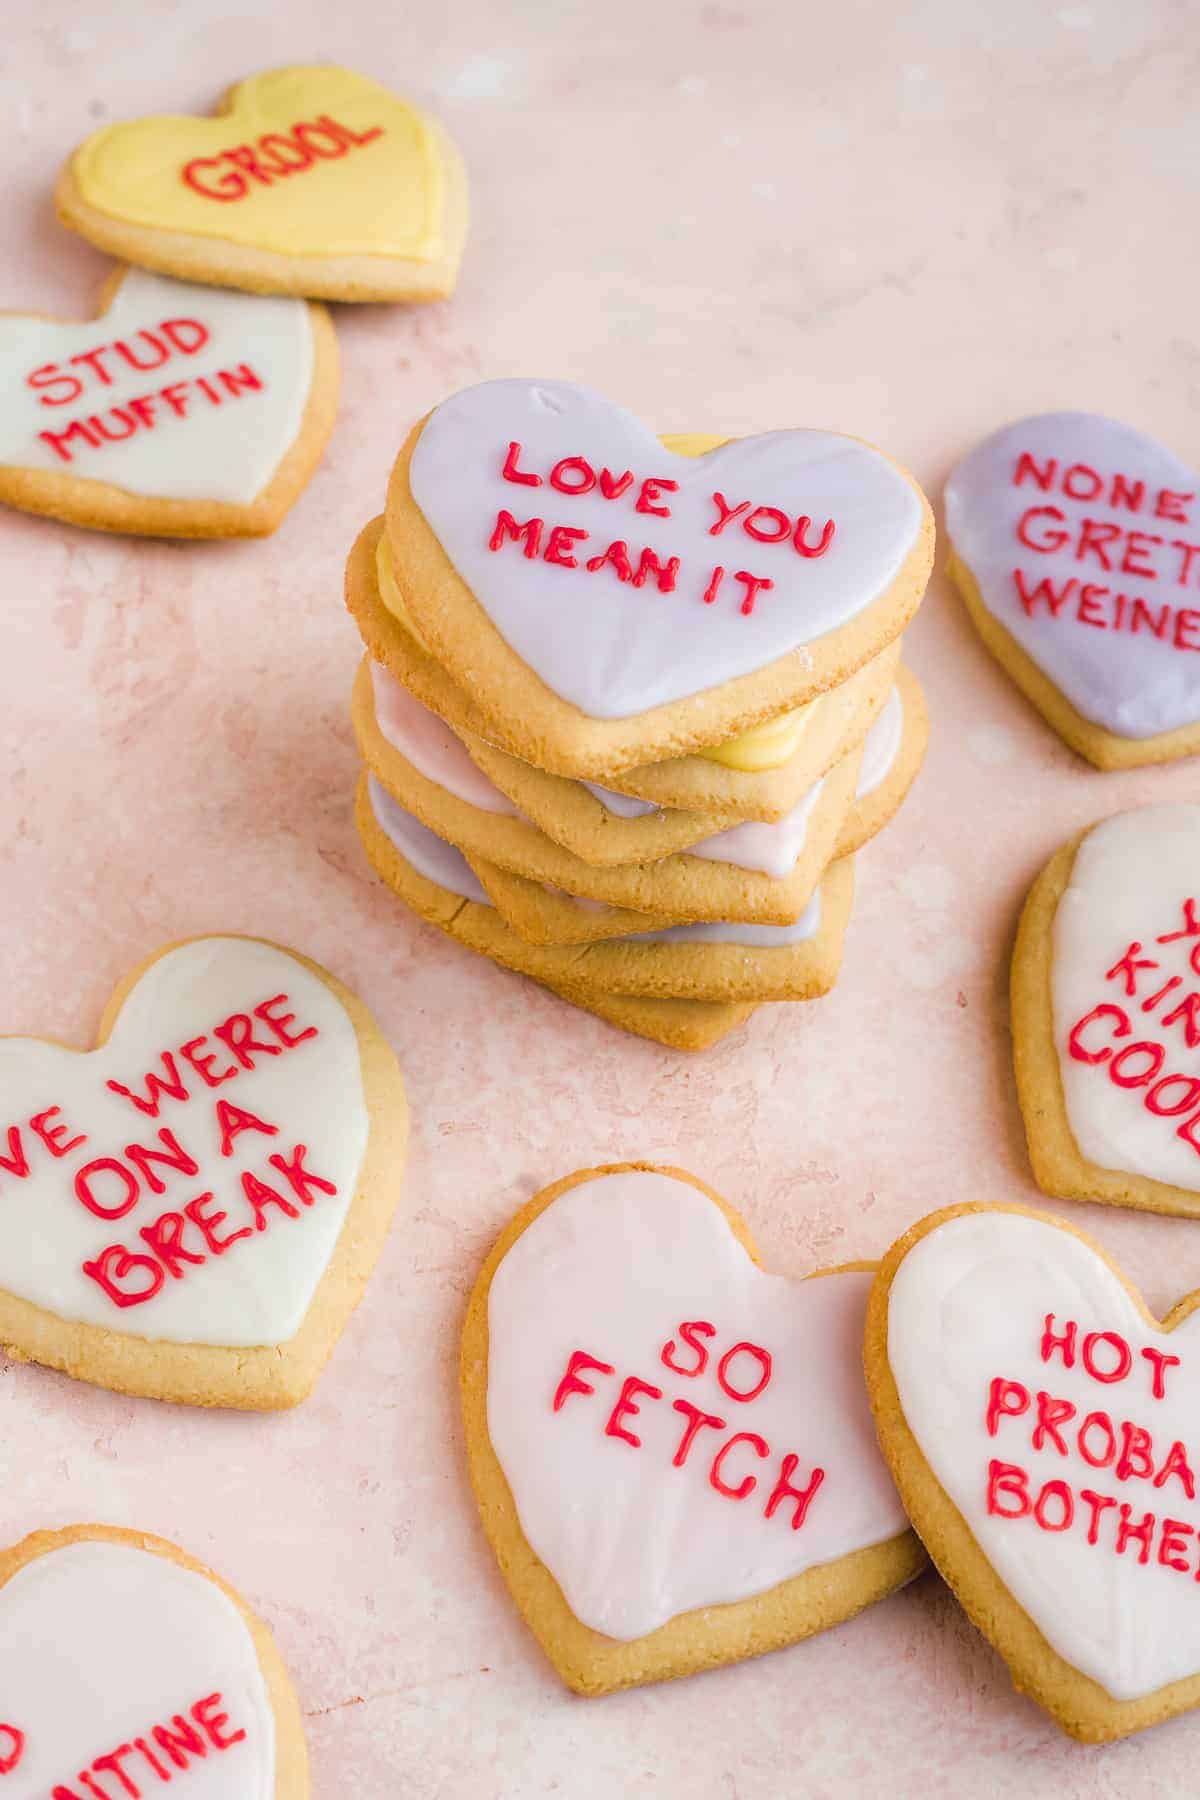 Conversation heart cookies with piped messages on them.